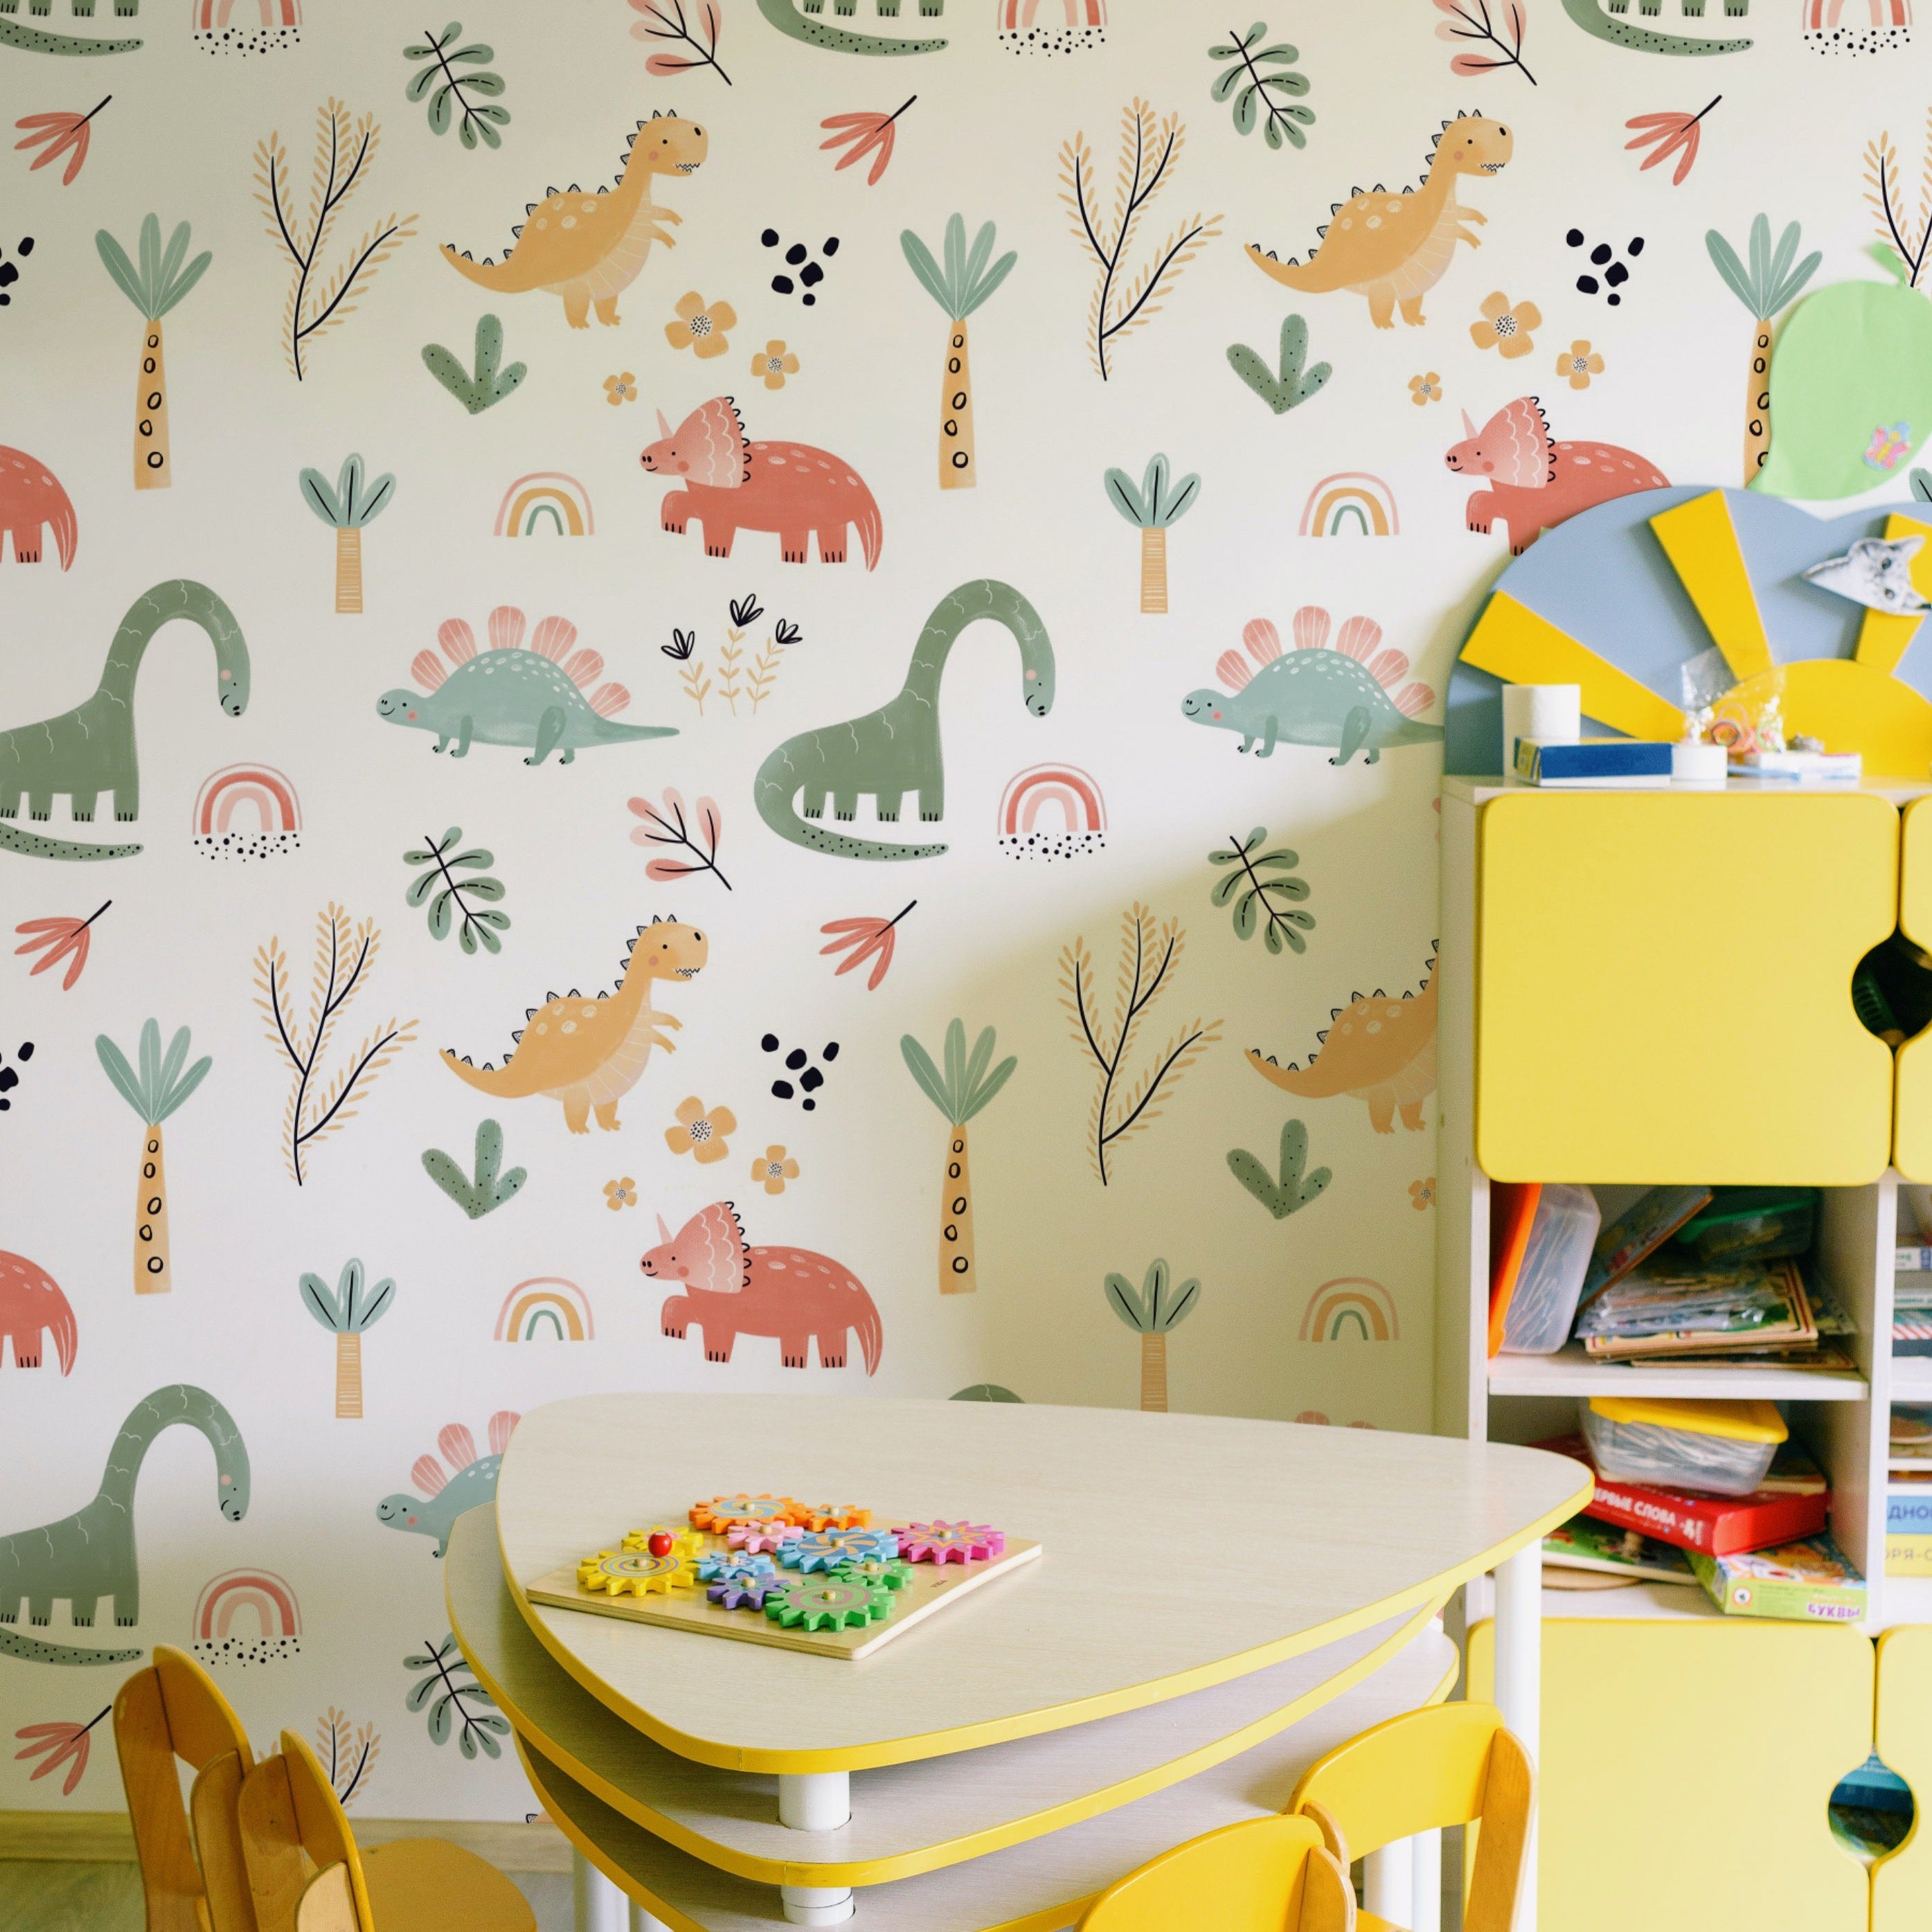 Educational Benefits of a Dinosaur-Themed Kids Room: Encouraging Learning through Play